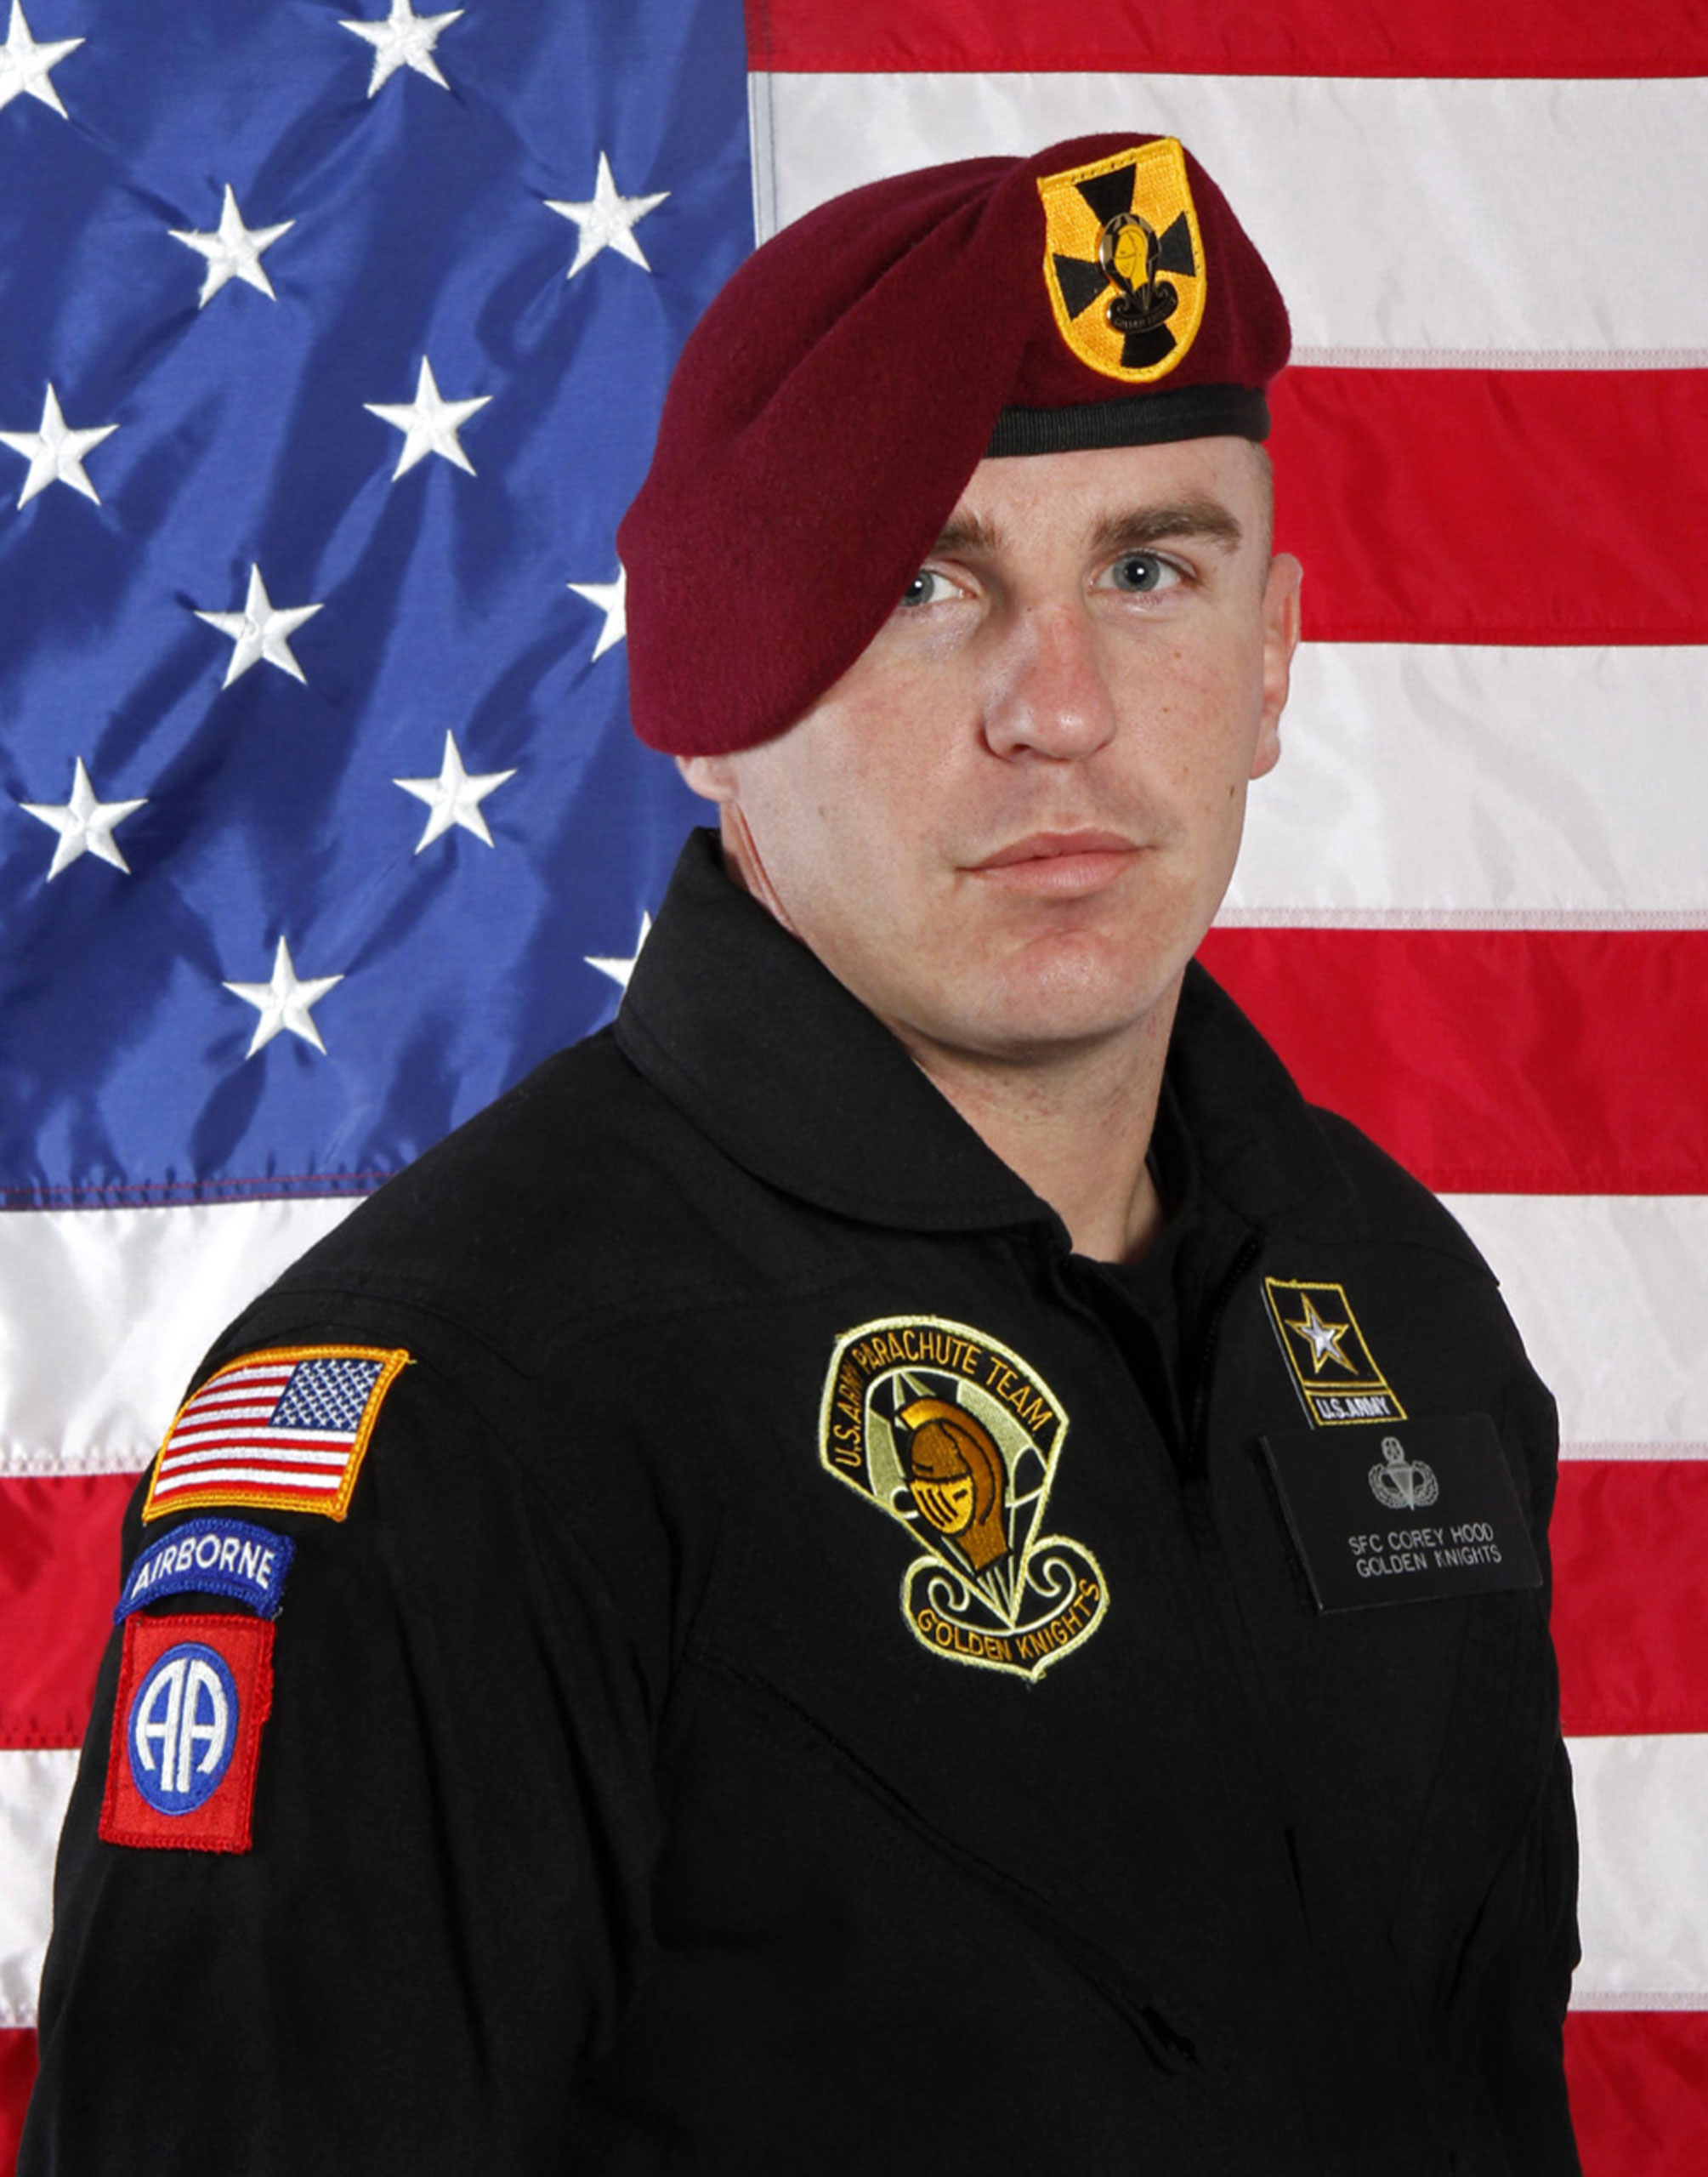 This undated photo provided by the U.S. Army shows Sgt. 1st Class Corey Hood. A parachutist the Army Golden Knights, Hood died Sunday after suffering severe injuries from an accident during a stunt on Saturday at the Chicago Air & Water Show, the Cook County medical examiner's office said. (U.S Army via AP)